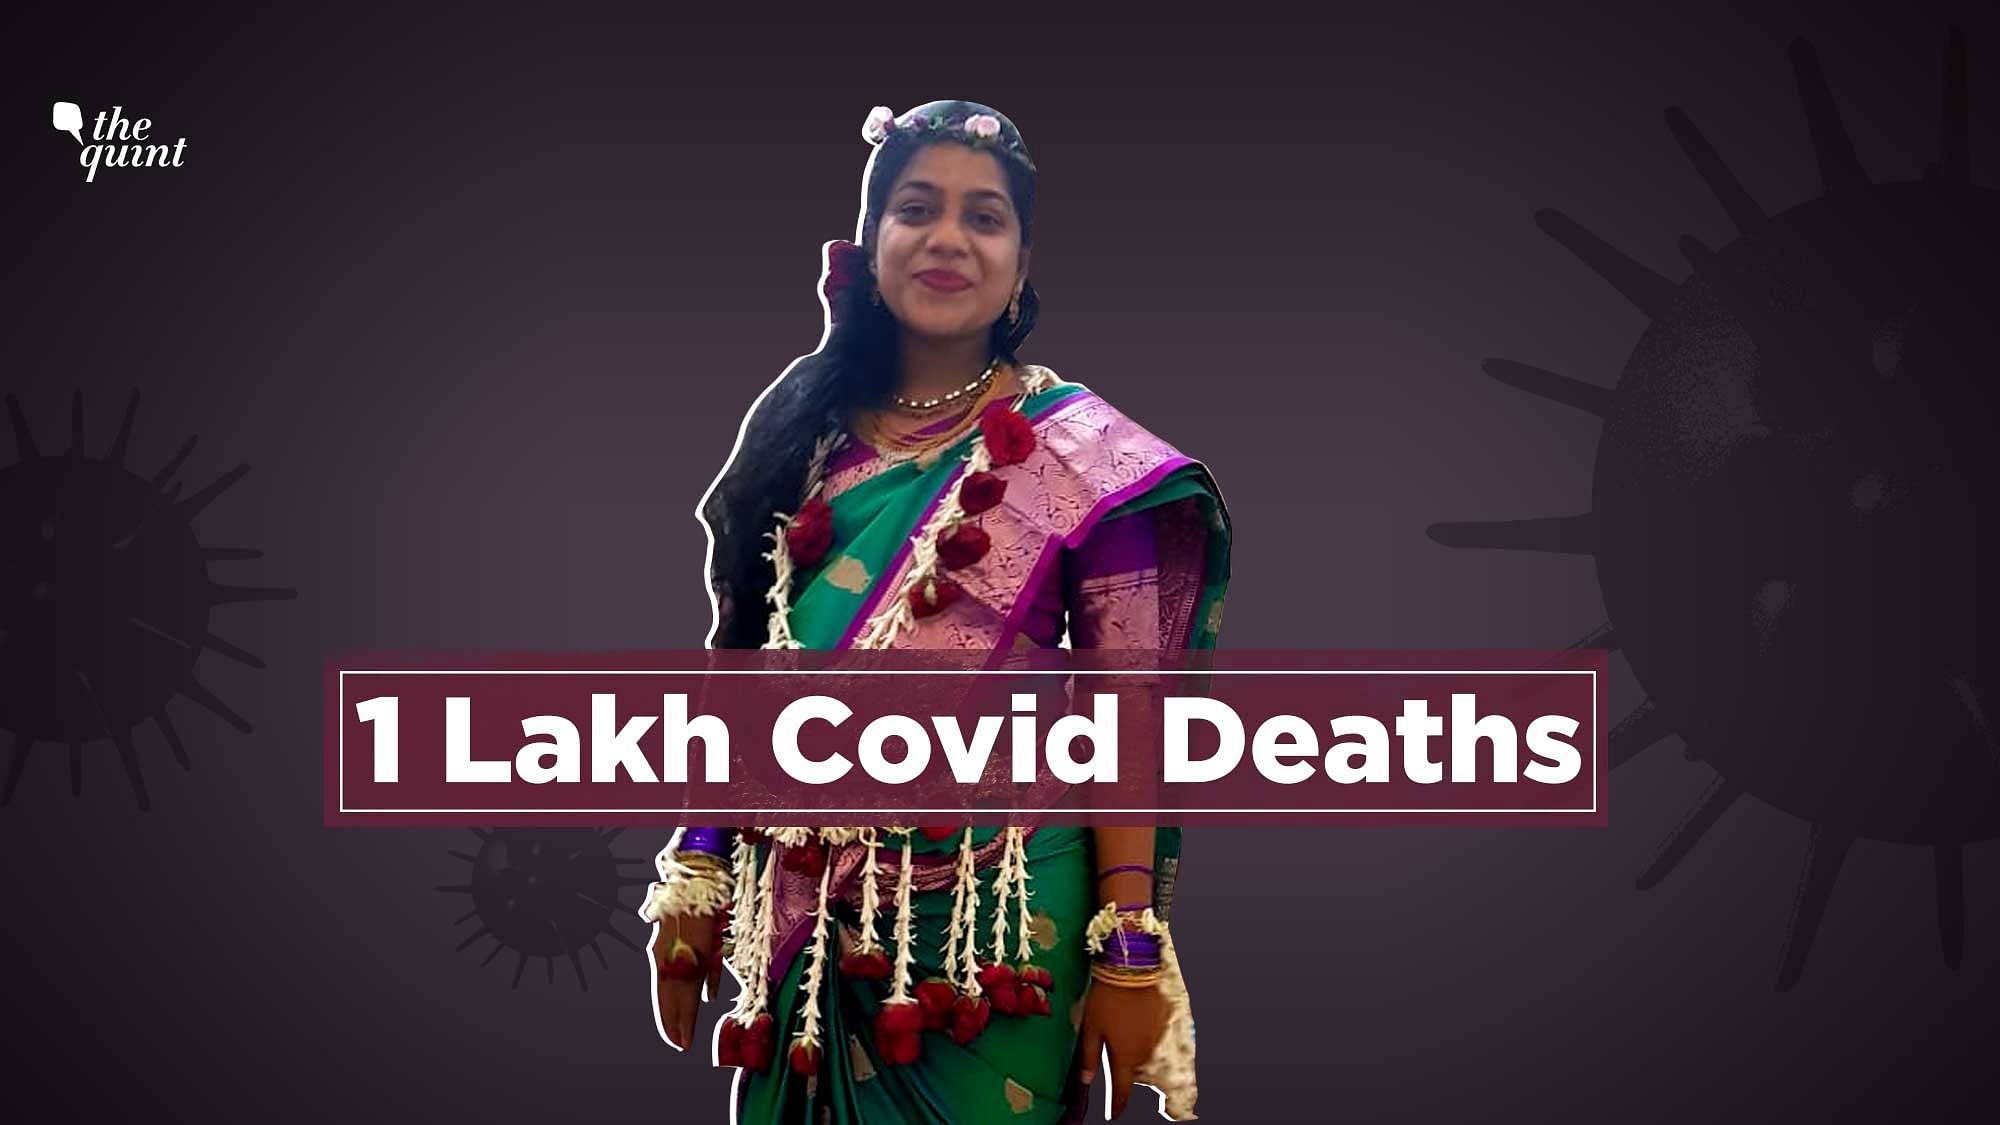 “We are losing our healthcare martyrs, our warriors,” say colleagues of pregnant Dr Pratiksha who died from COVID-19